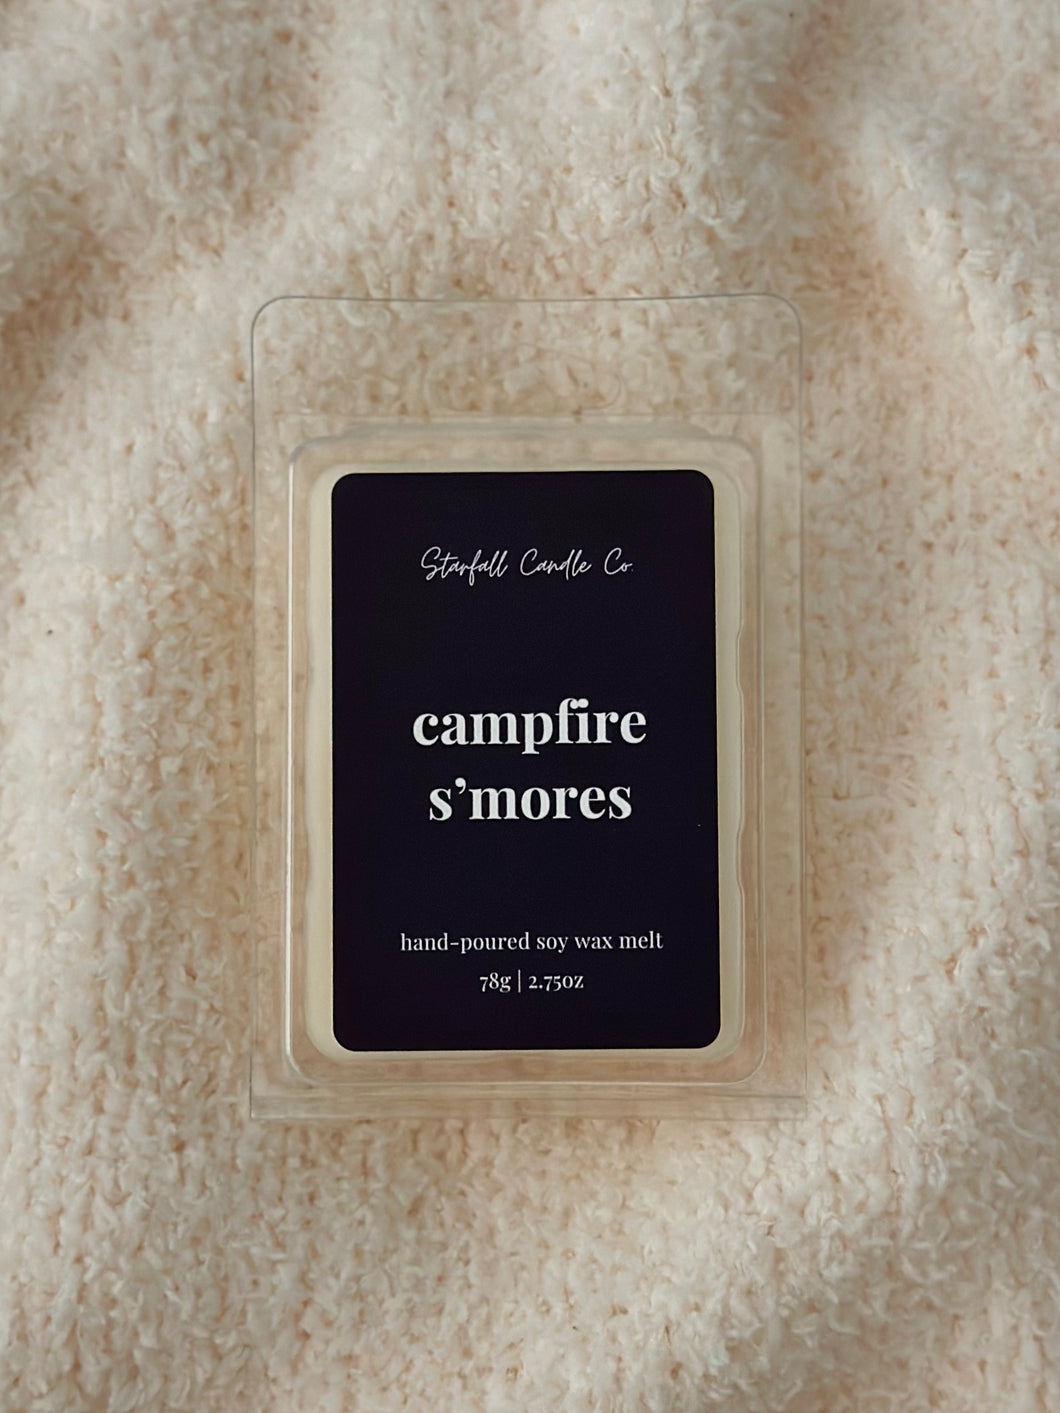 Campfire S'mores Soy Wax Melt